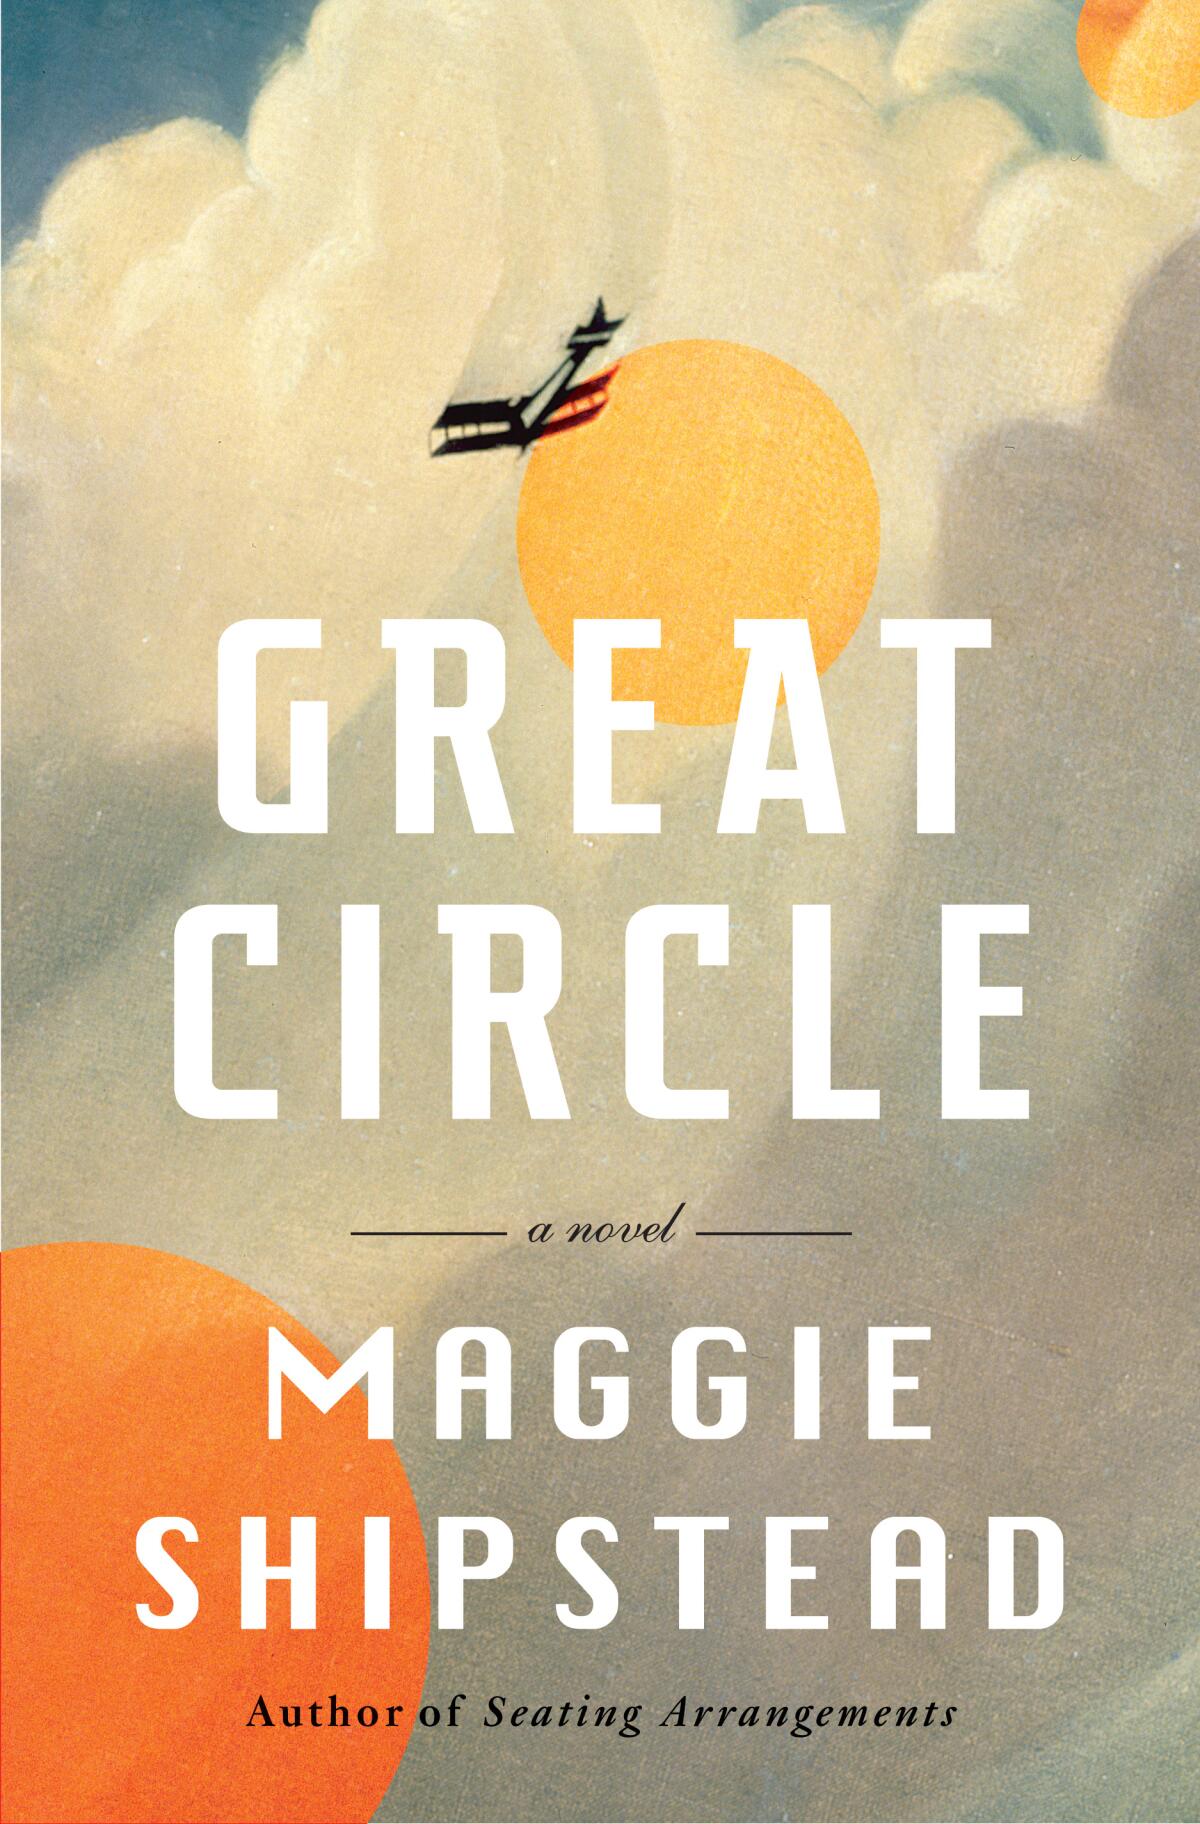 "Great Circle" by Maggie Shipstead.